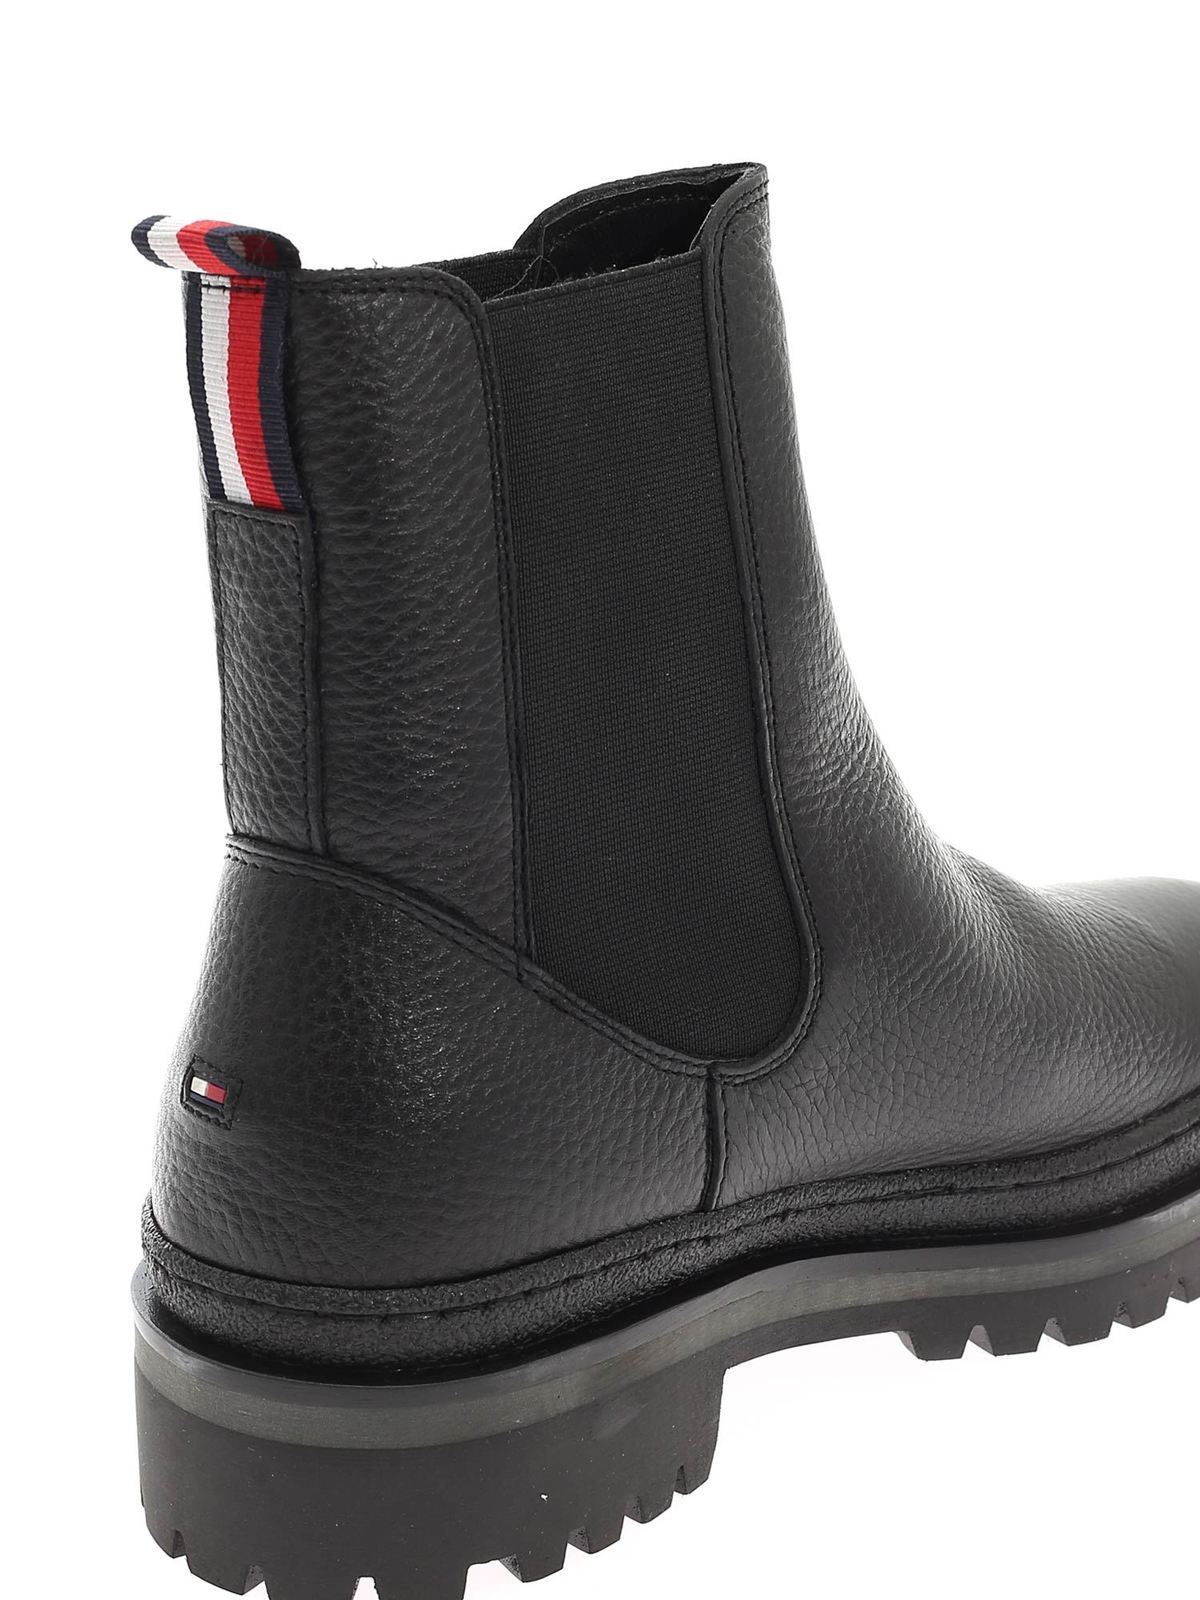 tommy hilfiger chelsea boots